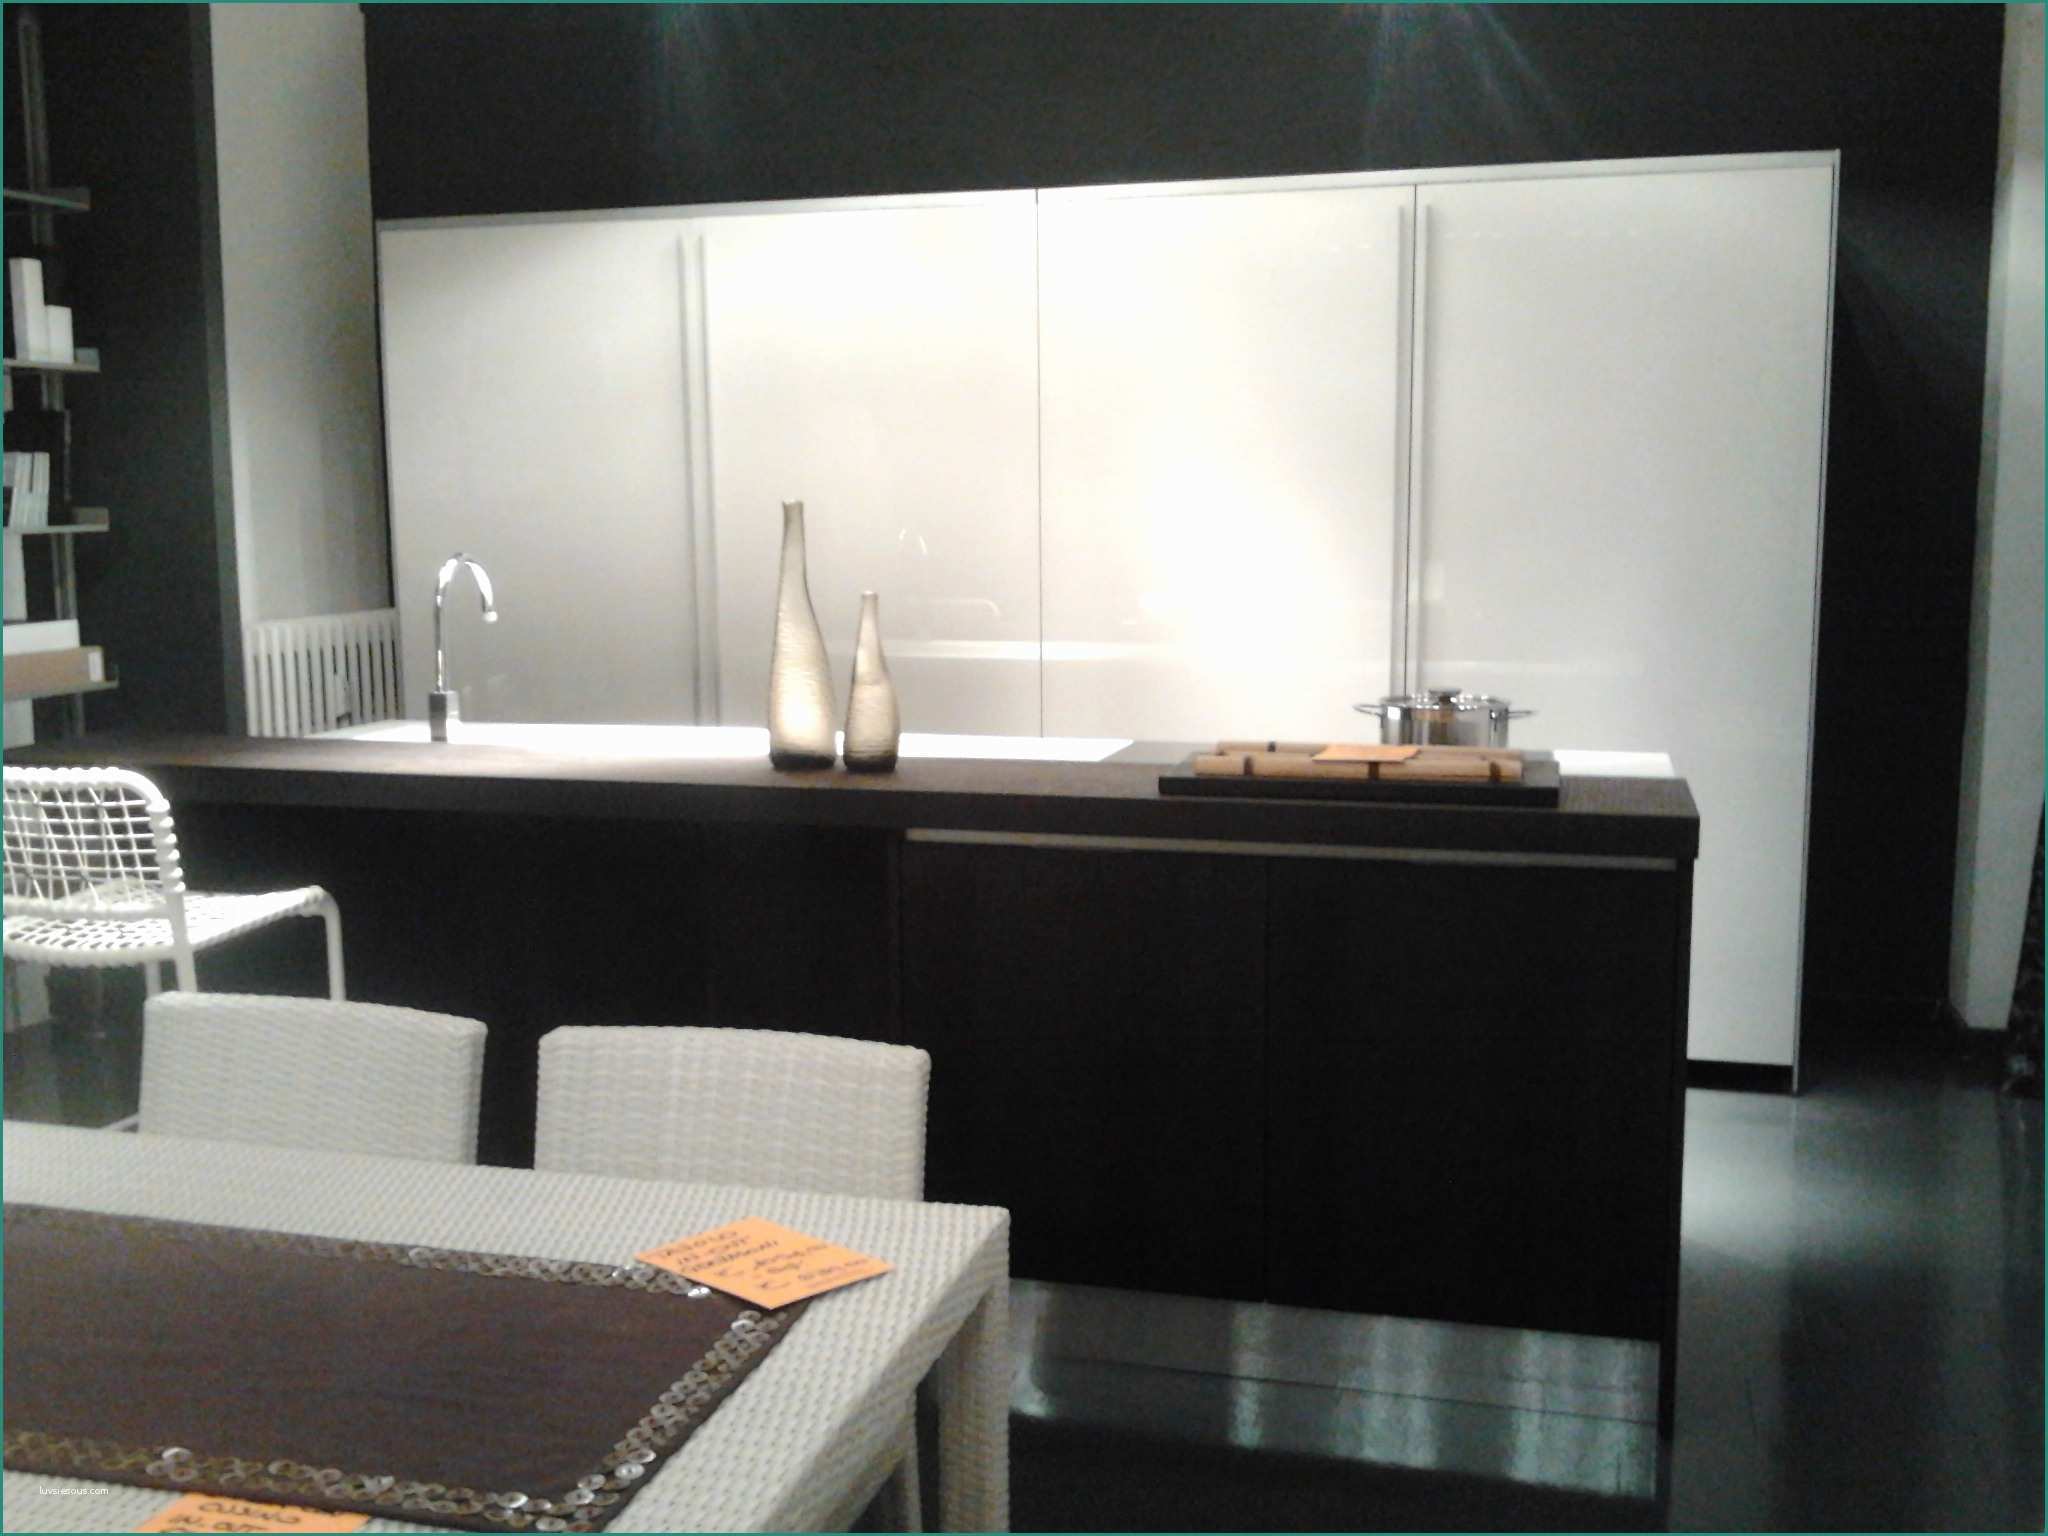 Cucine Con isola Centrale E Cucina Country Bianca Free Immagini Cucina Country Bianca with